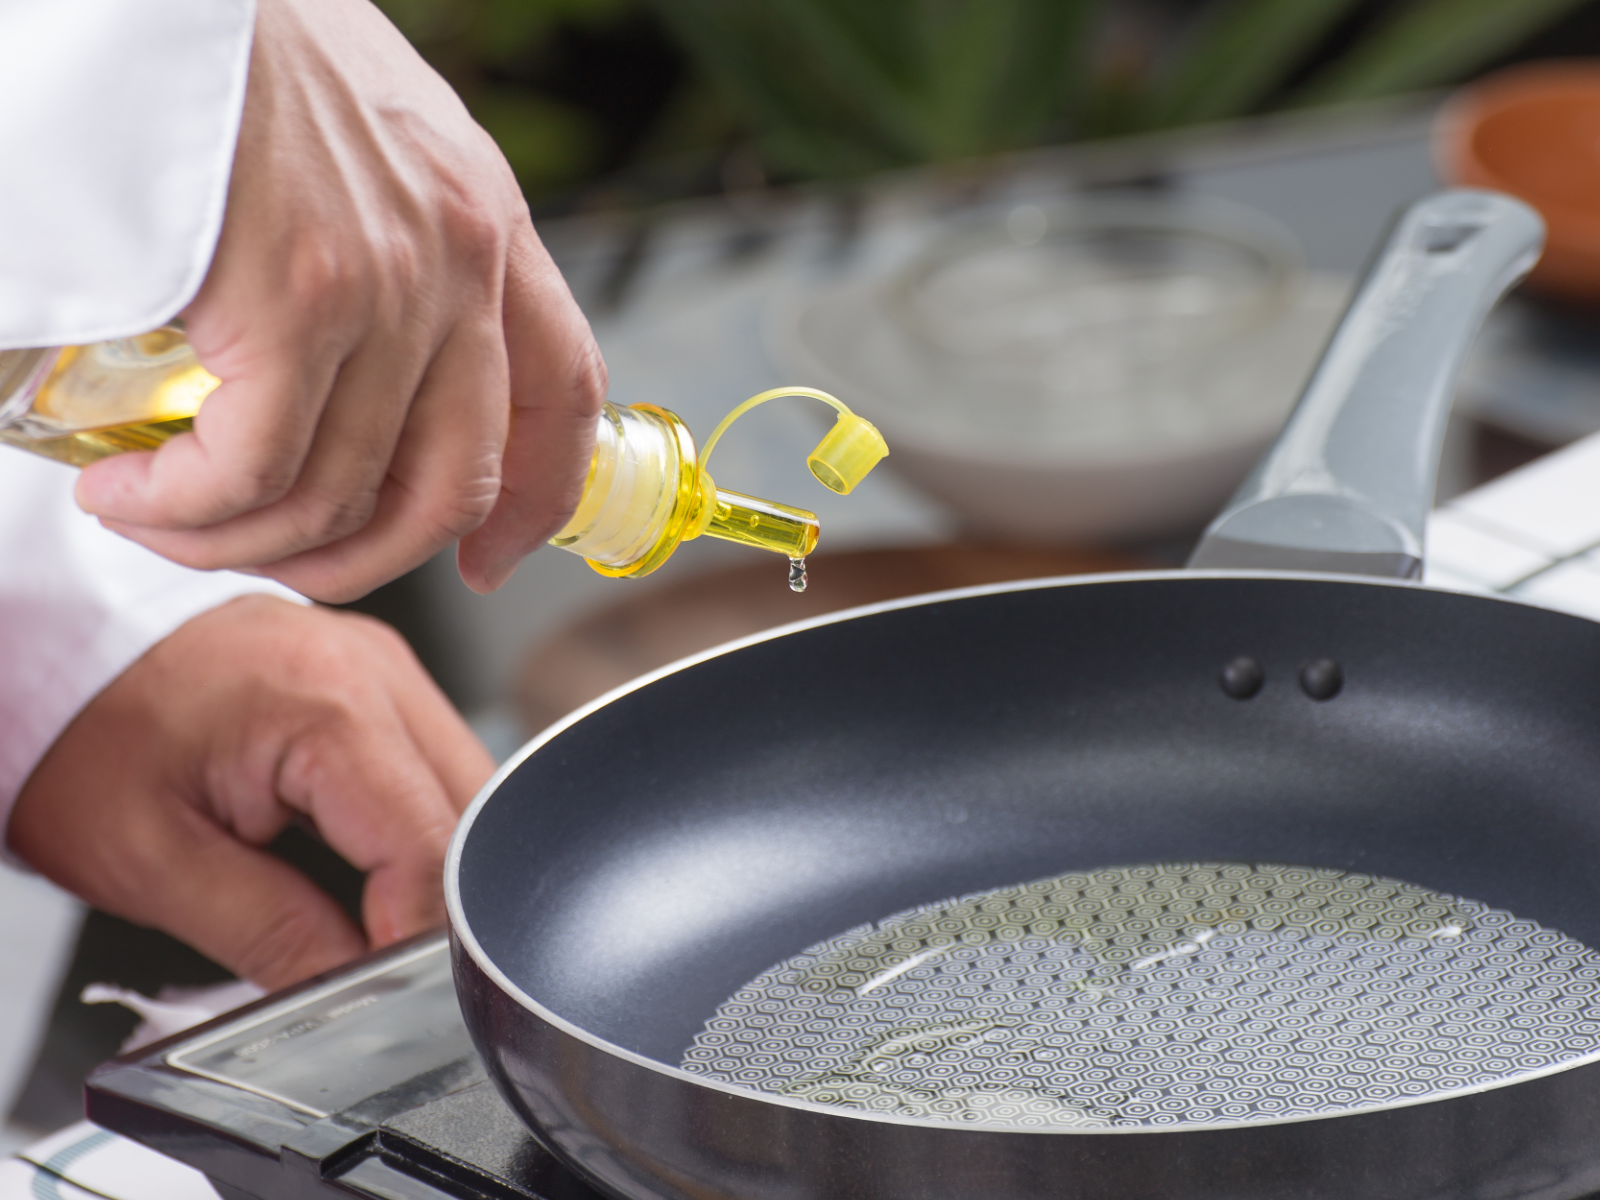 chef squeezing olive oil onto a pan